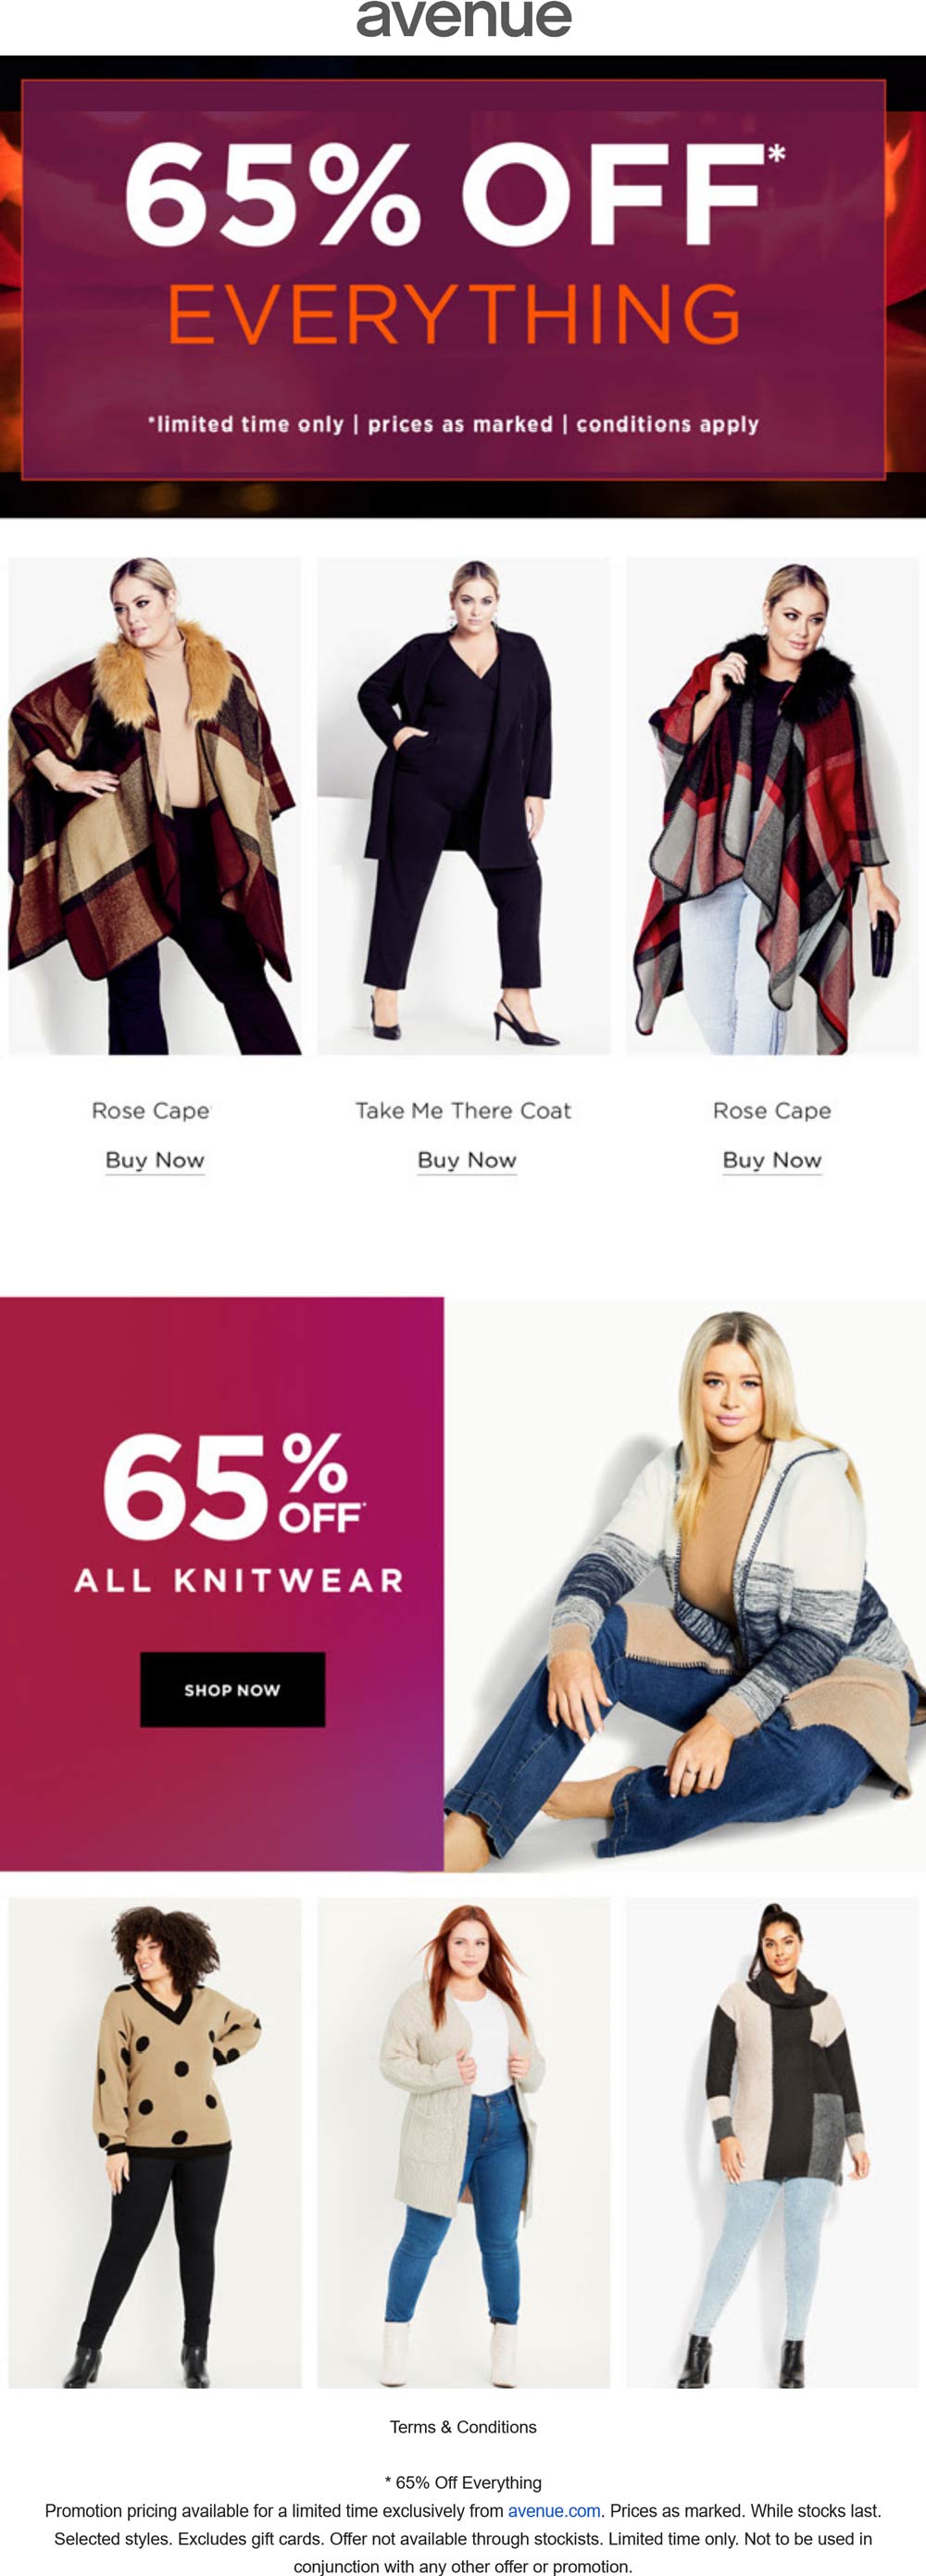 Avenue stores Coupon  65% off everything at Avenue #avenue 